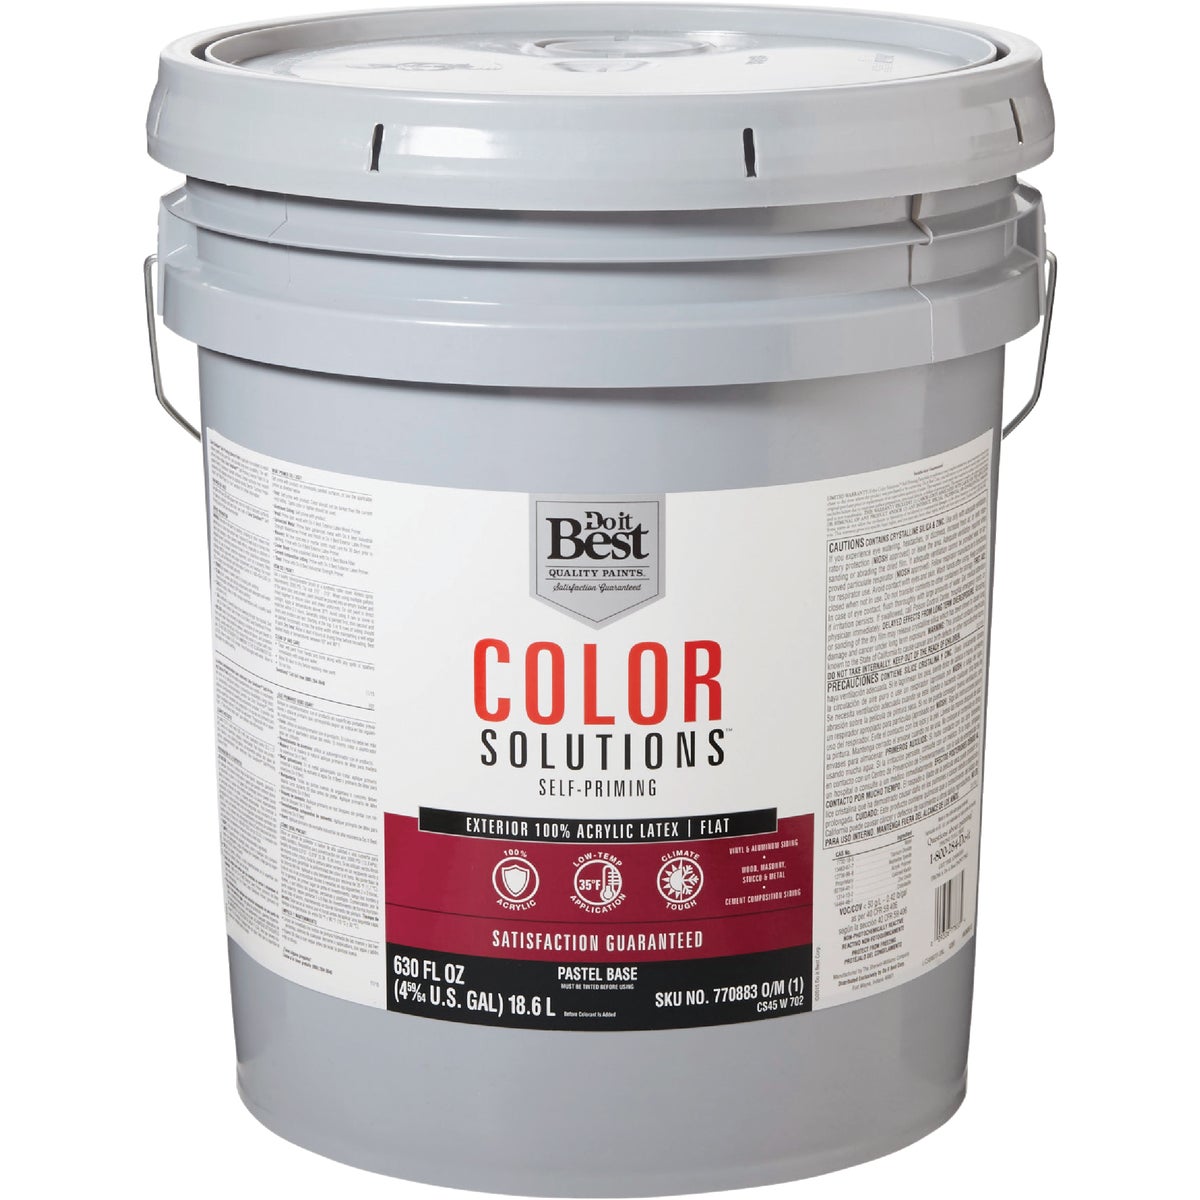 Do it Best Color Solutions 100% Acrylic Latex Self-Priming Flat Exterior House Paint, Pastel Base, 5 Gal.